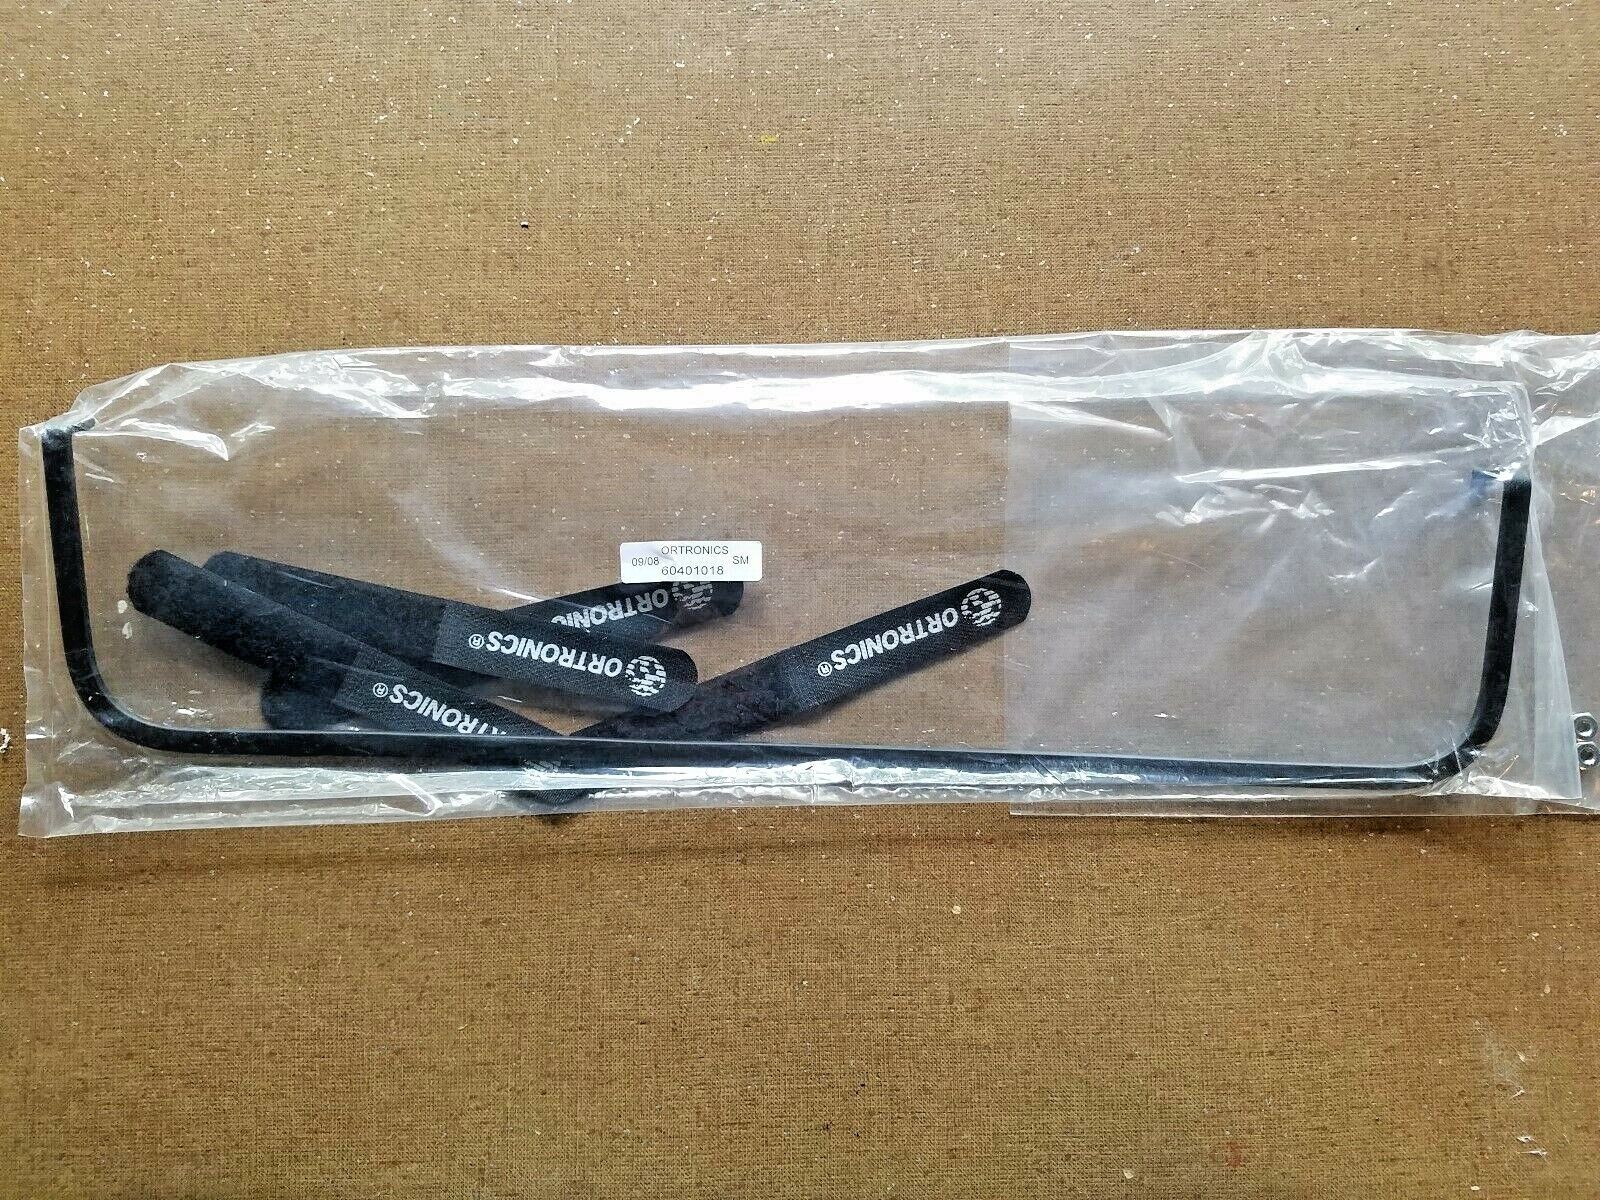 60401018 Ortronics Cable Management Bar for 19